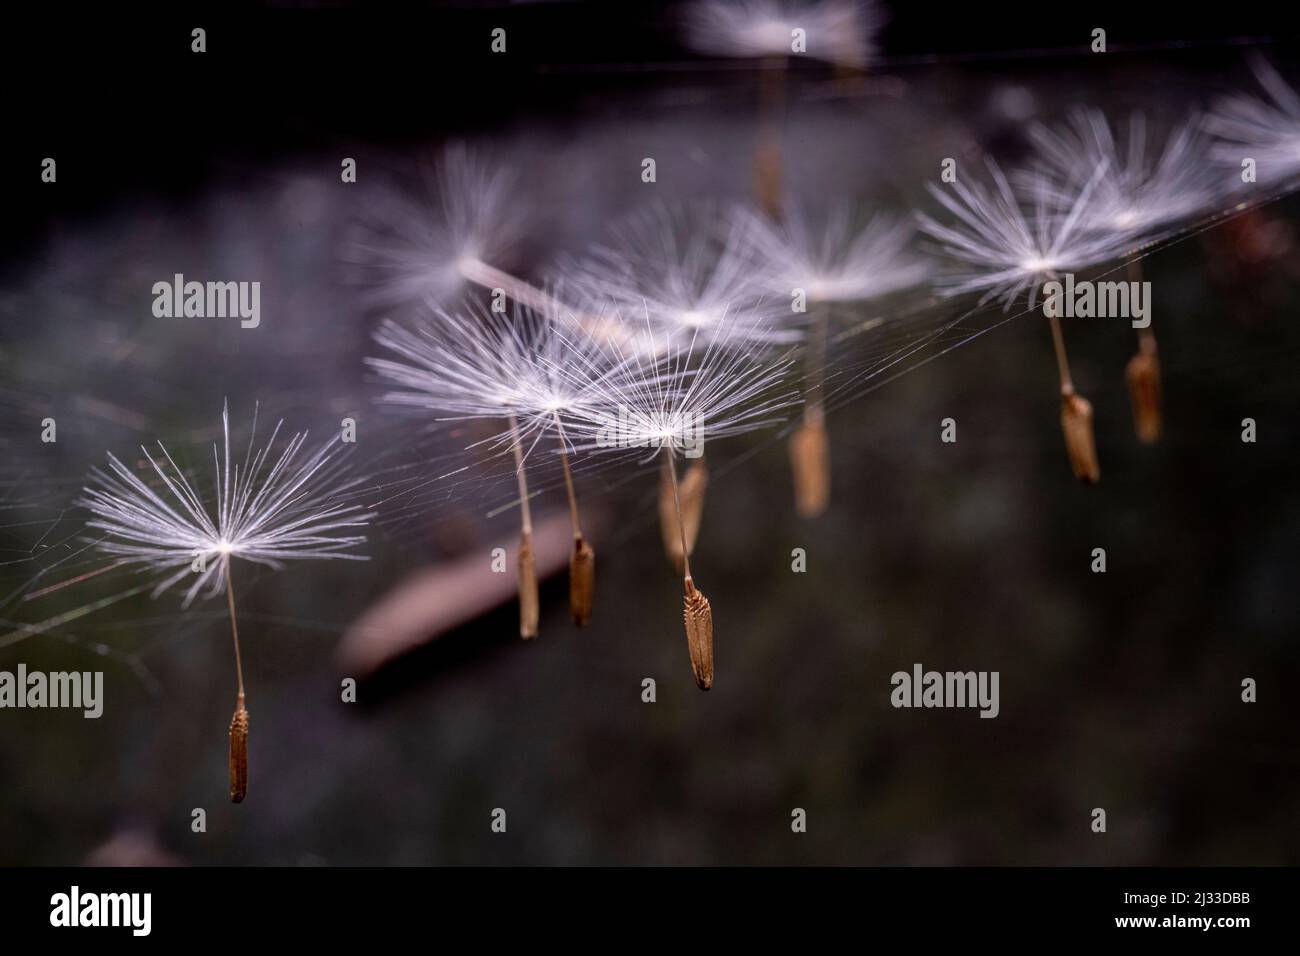 The seeds of a dandelion are caught from the light breeze of a Sussex springtime garden by a spider's web. Stock Photo